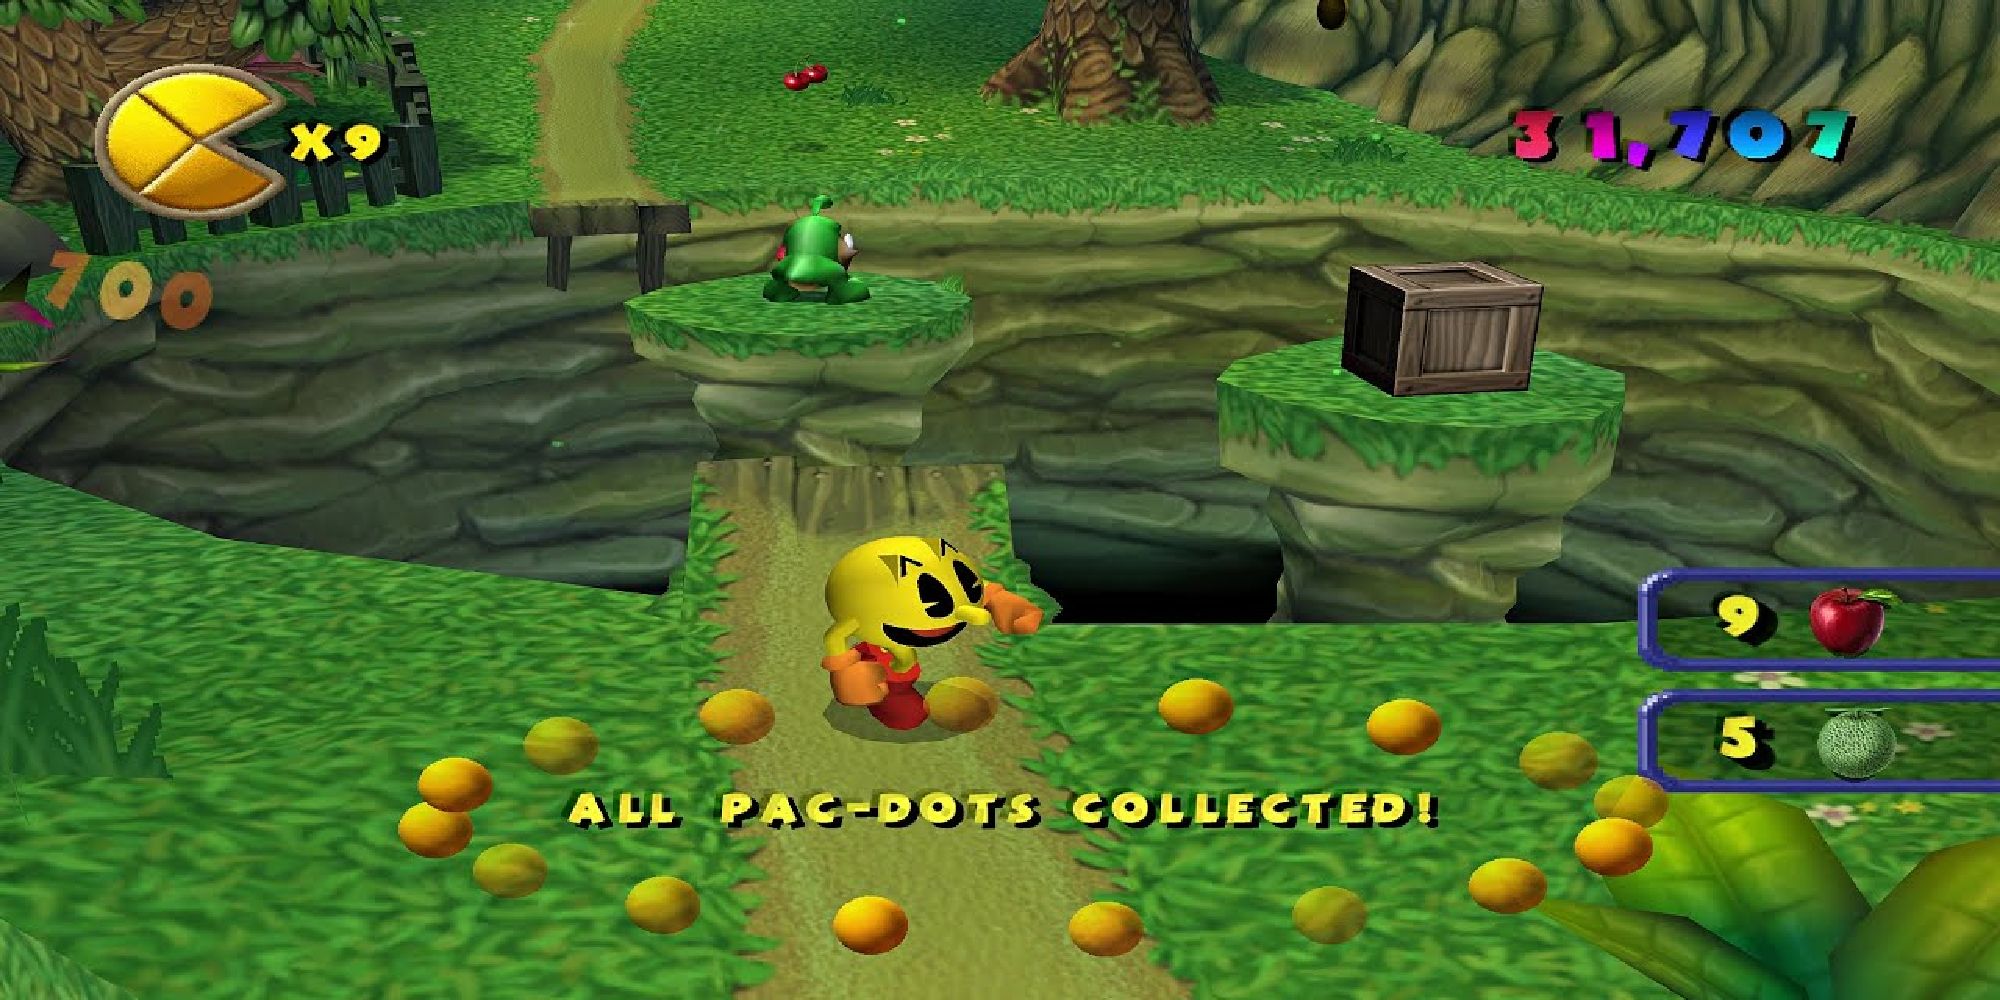 Pac-Man collecting pac-dots during a level in Pac-Man World 2 for PS2